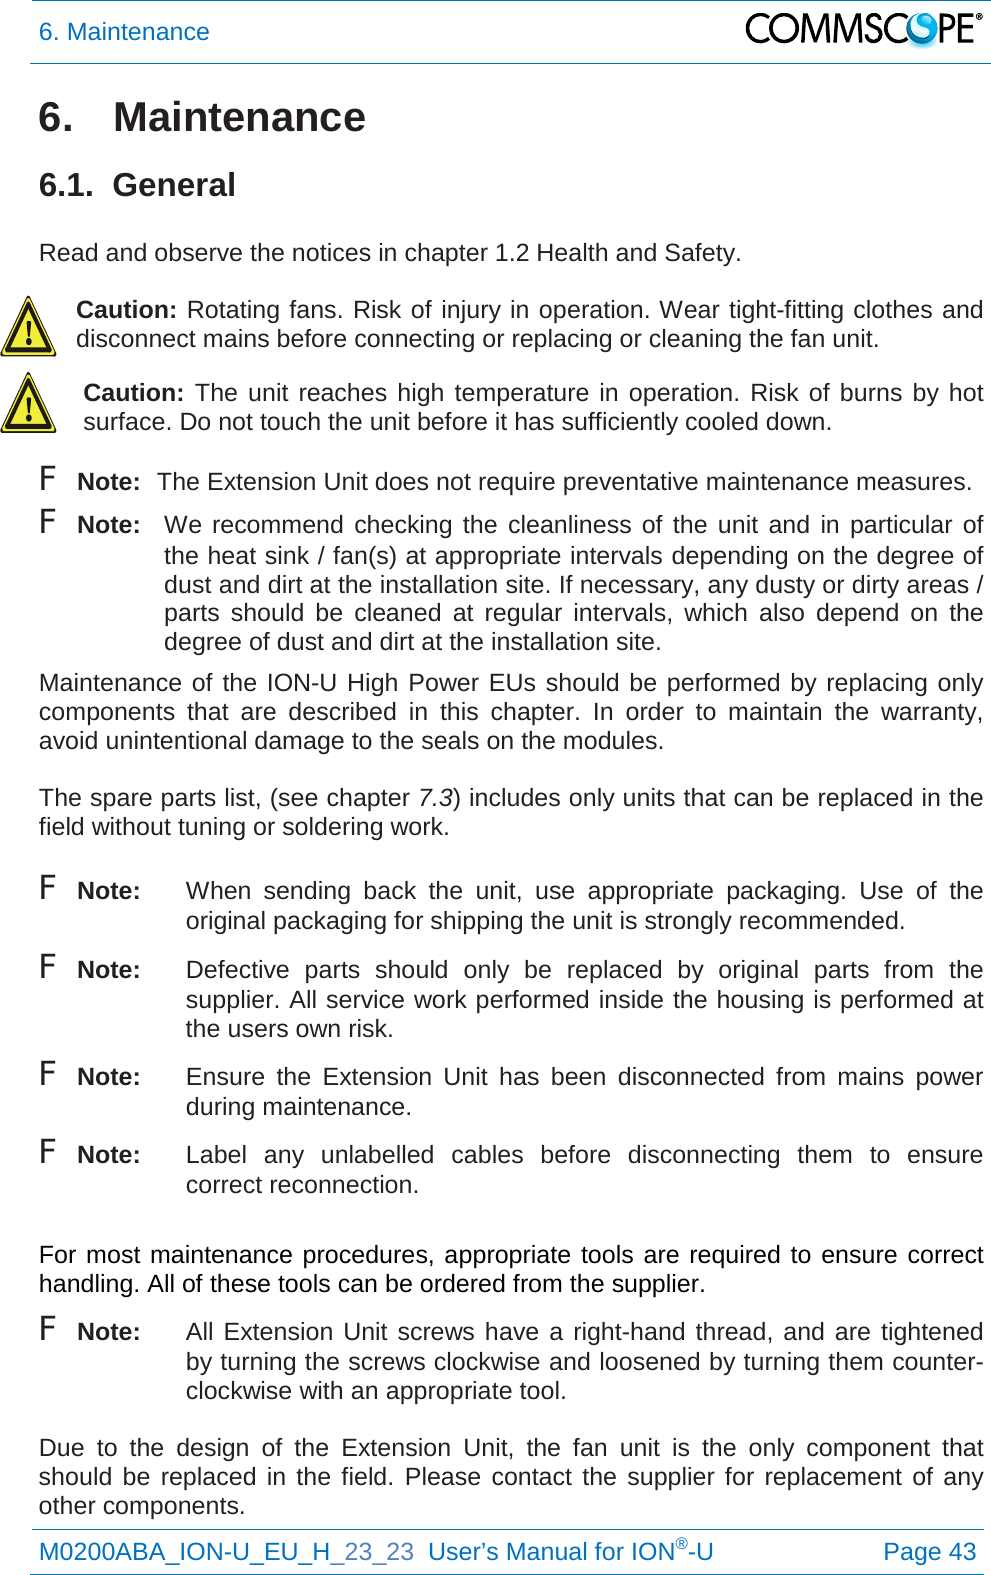 6. Maintenance   M0200ABA_ION-U_EU_H_23_23  User’s Manual for ION®-U  Page 43  6. Maintenance 6.1.  General  Read and observe the notices in chapter 1.2 Health and Safety.  Caution: Rotating fans. Risk of injury in operation. Wear tight-fitting clothes and disconnect mains before connecting or replacing or cleaning the fan unit. Caution: The unit reaches high temperature in operation. Risk of burns by hot surface. Do not touch the unit before it has sufficiently cooled down. F Note: The Extension Unit does not require preventative maintenance measures. F Note: We recommend checking the cleanliness of the unit and in particular of the heat sink / fan(s) at appropriate intervals depending on the degree of dust and dirt at the installation site. If necessary, any dusty or dirty areas / parts should be cleaned at regular intervals, which also depend on the degree of dust and dirt at the installation site. Maintenance of the ION-U High Power EUs should be performed by replacing only components that are described in this chapter. In order to maintain the  warranty, avoid unintentional damage to the seals on the modules.  The spare parts list, (see chapter 7.3) includes only units that can be replaced in the field without tuning or soldering work.  F Note: When  sending back the unit, use appropriate packaging.  Use of the original packaging for shipping the unit is strongly recommended. F Note: Defective parts should only be replaced by original parts from the supplier. All service work performed inside the housing is performed at the users own risk. F Note: Ensure the Extension  Unit has been disconnected from mains power during maintenance. F Note: Label any unlabelled cables before disconnecting them to ensure correct reconnection.  For most maintenance procedures, appropriate tools are required to ensure correct handling. All of these tools can be ordered from the supplier.  F Note:  All Extension Unit screws have a right-hand thread, and are tightened by turning the screws clockwise and loosened by turning them counter-clockwise with an appropriate tool.  Due to the design of the Extension  Unit, the fan unit is the only component that should be replaced in the field. Please contact the supplier for replacement of any other components. 